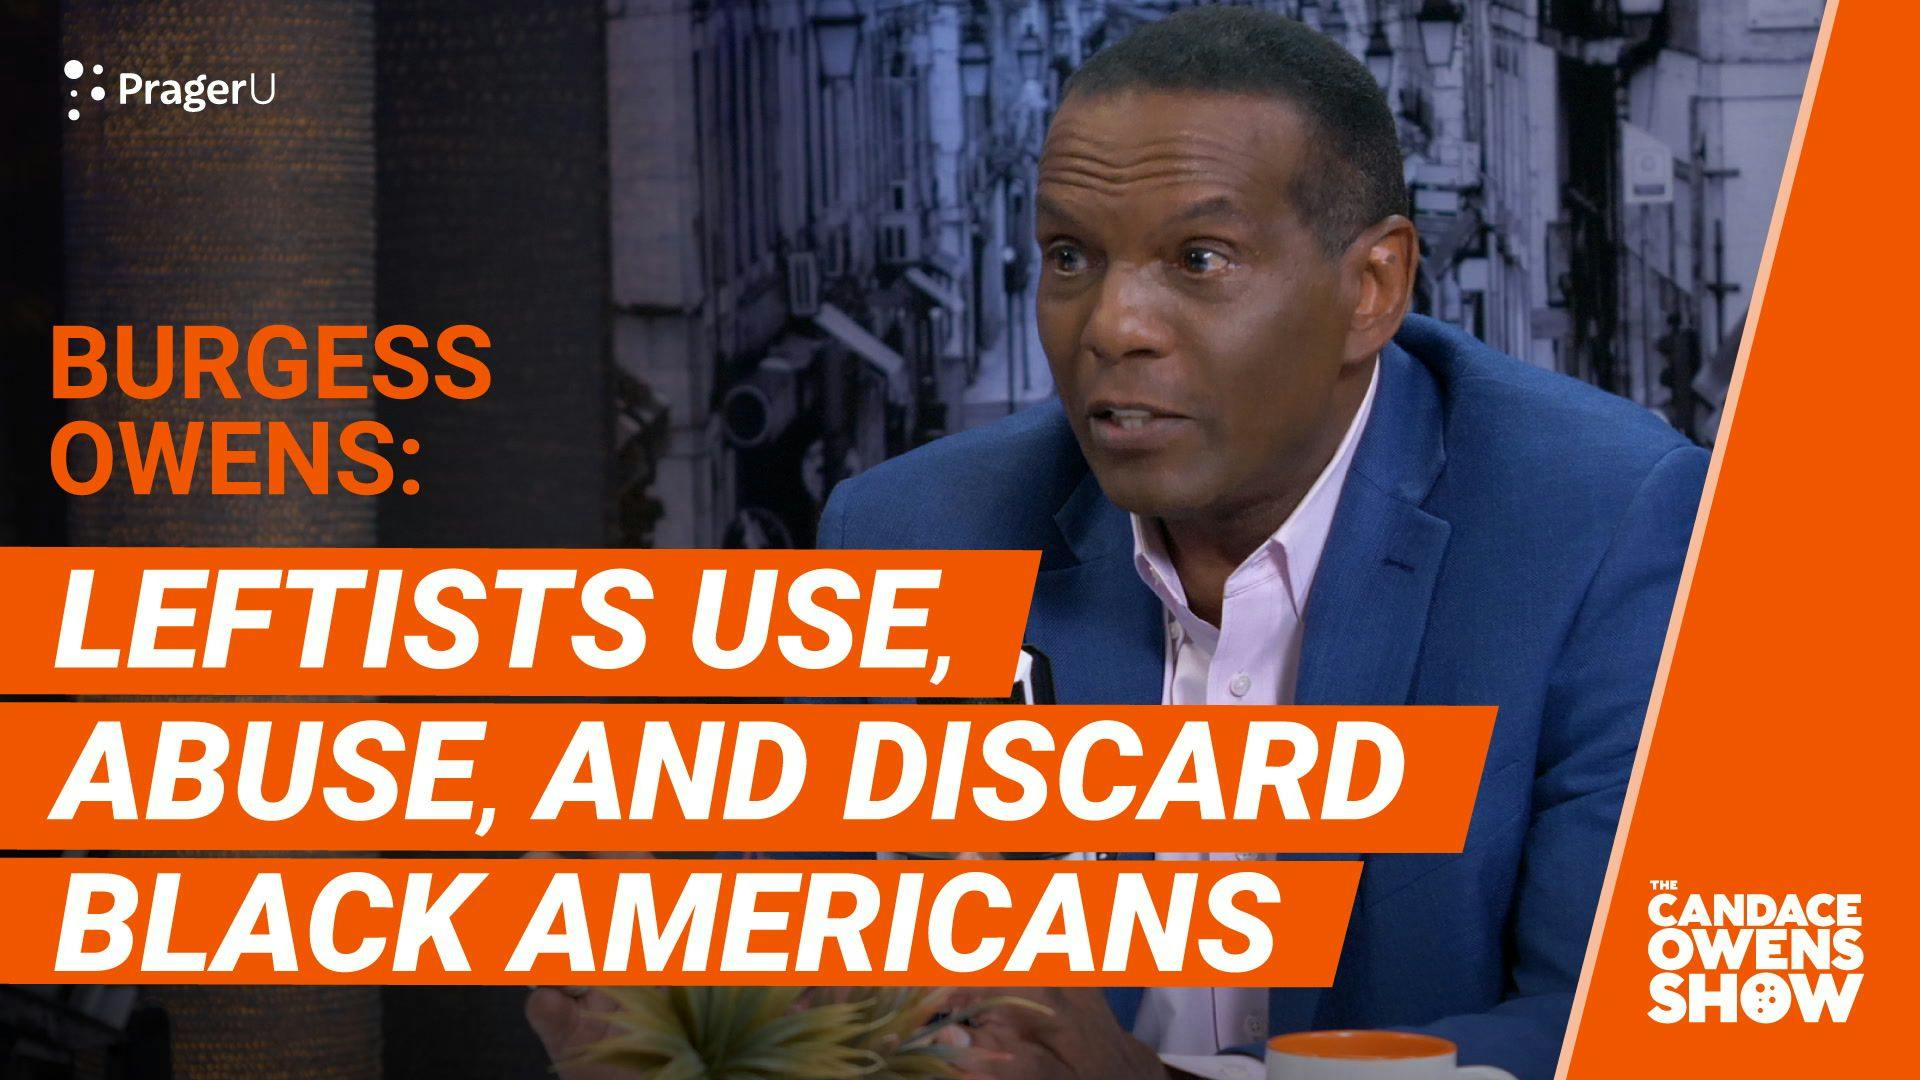 Leftists Use, Abuse, and Discard Black Americans